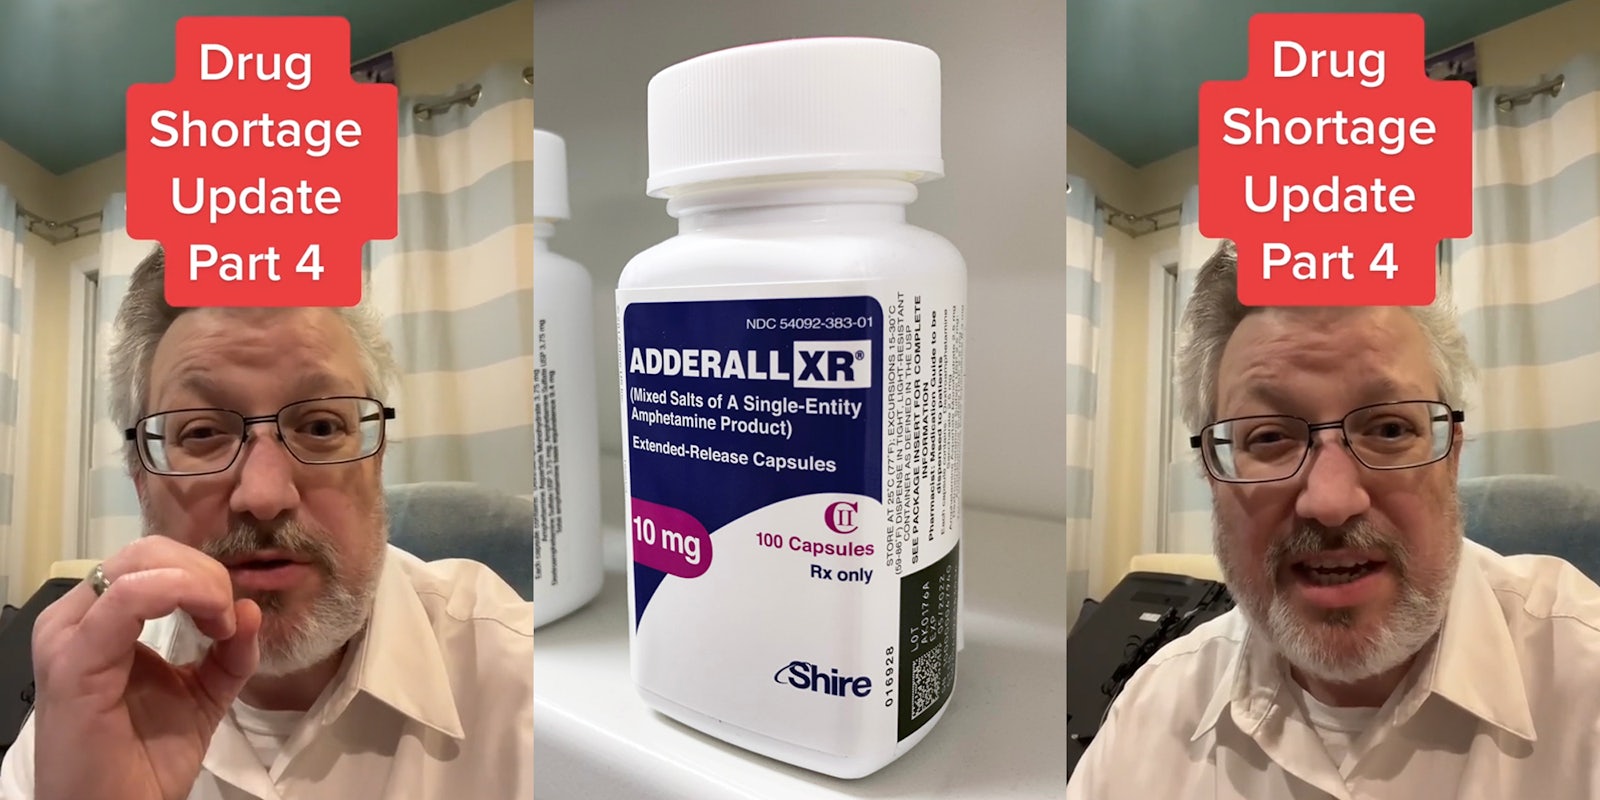 pharmacist speaking holding up hand making zero with caption 'Drug Shortage Update Part 4' (l) Adderall ADHD medication in bottle on shelf (c) pharmacist speaking with caption 'Drug Shortage Update Part 4' (r)